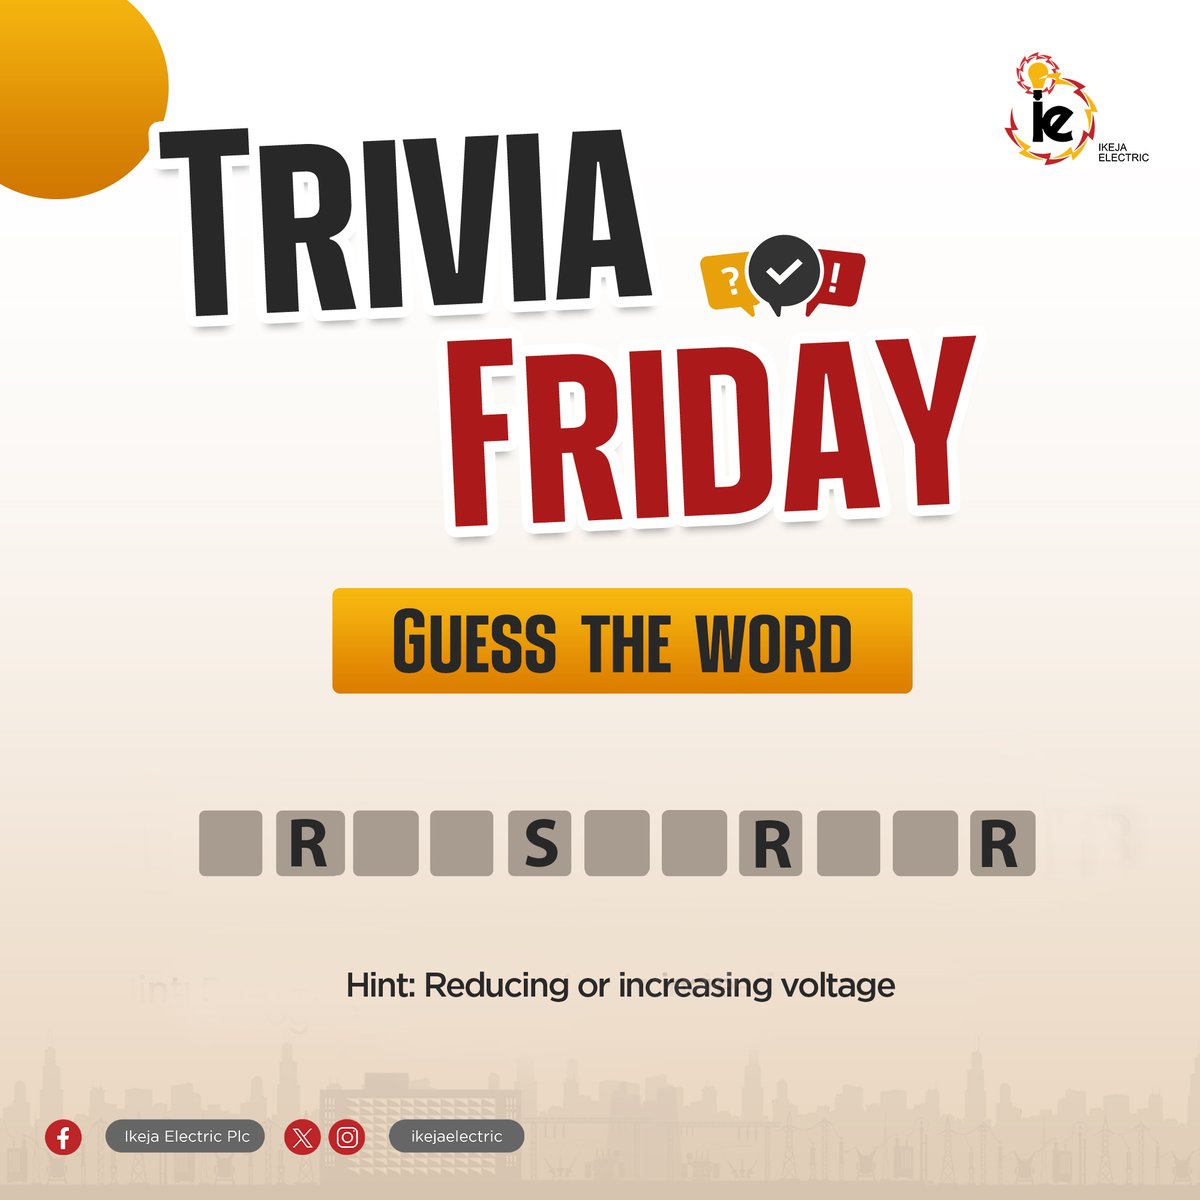 Ikeja Electric Trivia Friday: Guess the word
 
_ R_ _ S _ _R_ _ R

Hint: Reducing or increasing voltage

P.S.: Avoid peeking at the comment section 😉

#TriviaFriday
#BringingEnergyToLifeResponsibly